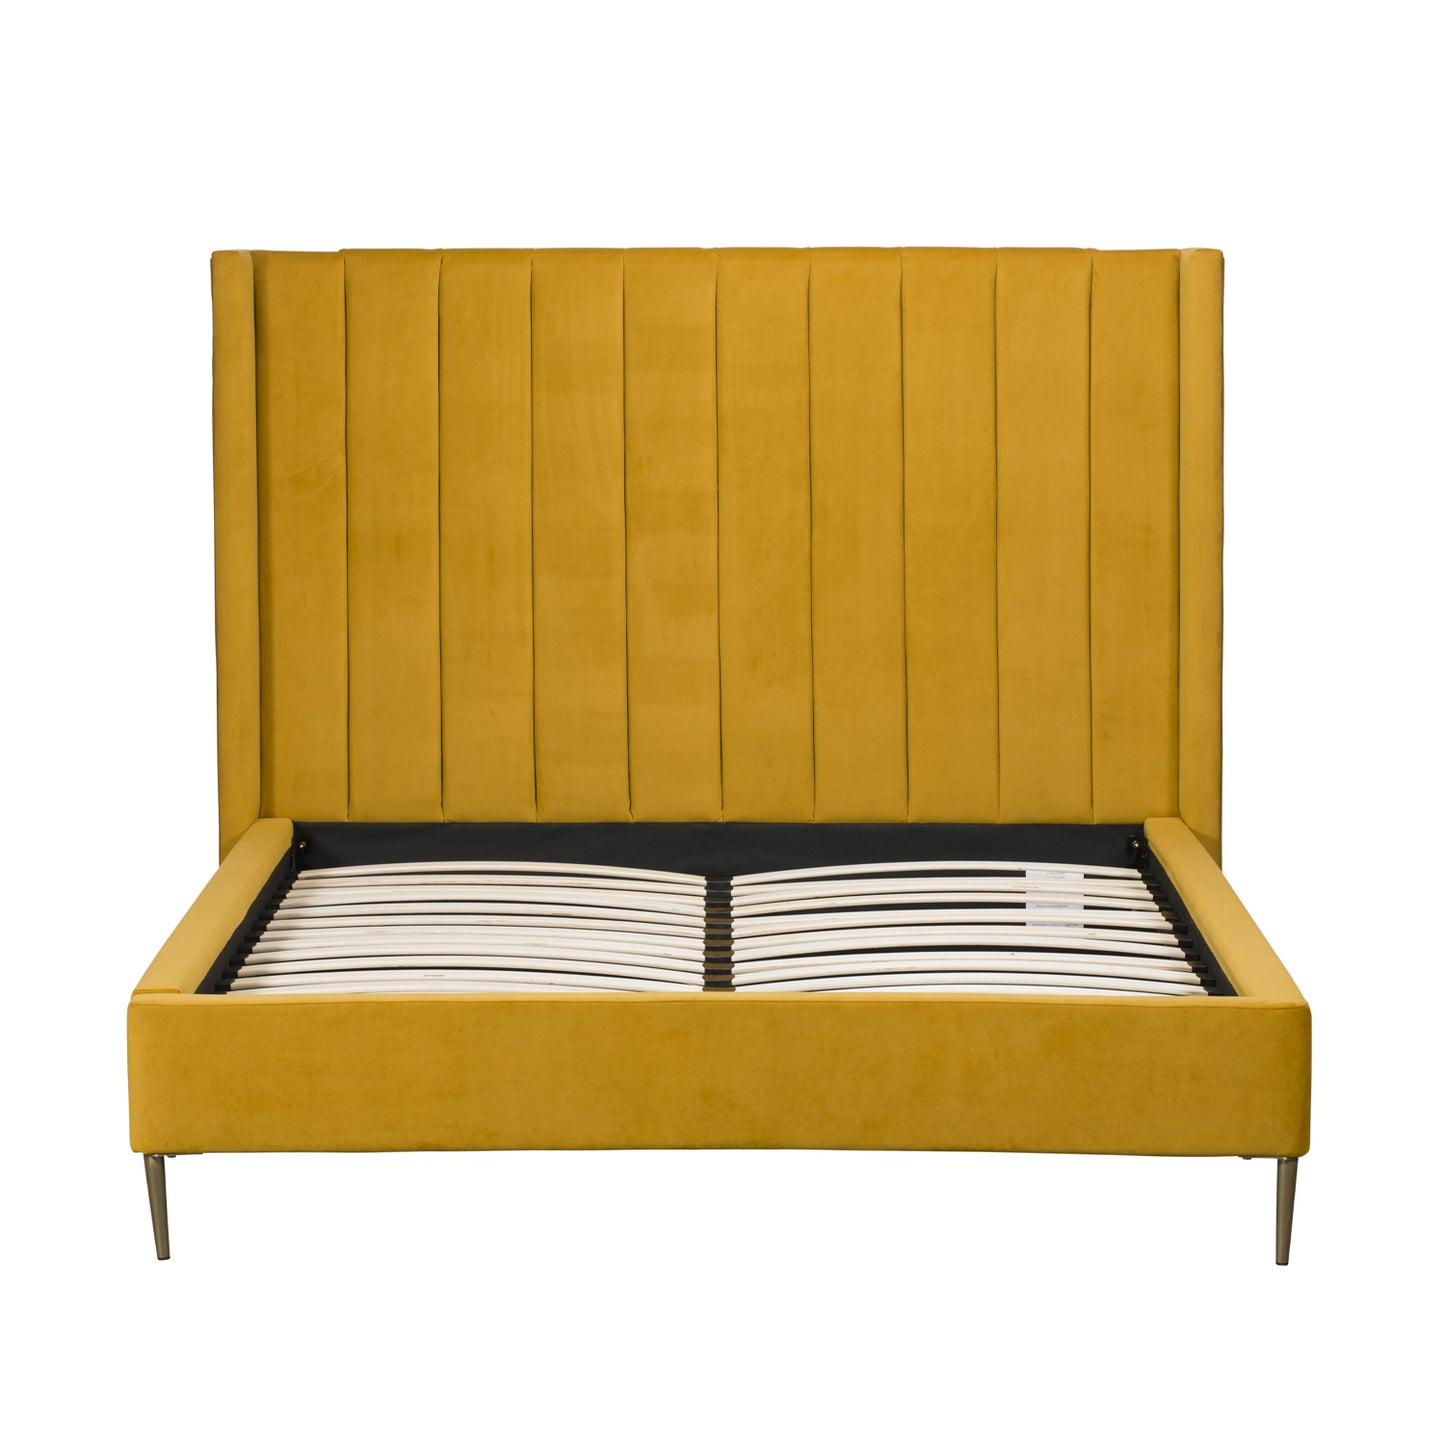 Maddox Highback Upholstered Bed - 6ft Turmeric